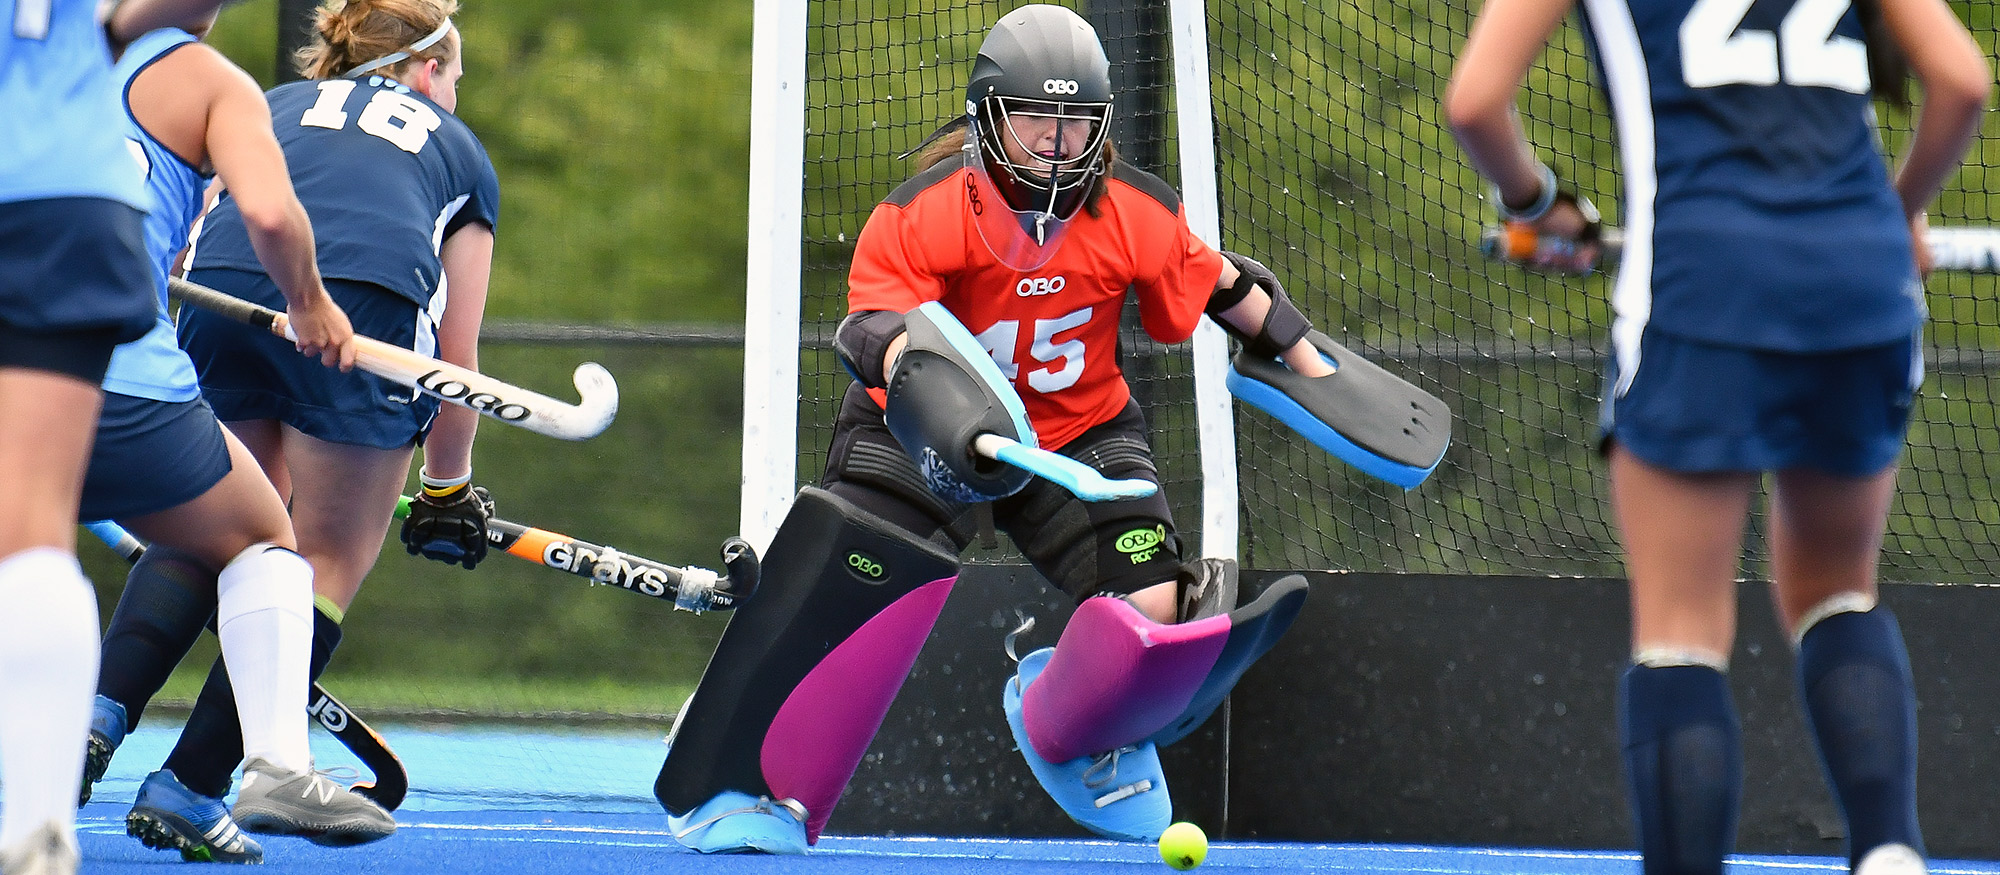 Rachel Katzenberg made 13 saves in a 4-0 loss at Springfield College on Oct. 18, 2022. (RJB Sports file photo)